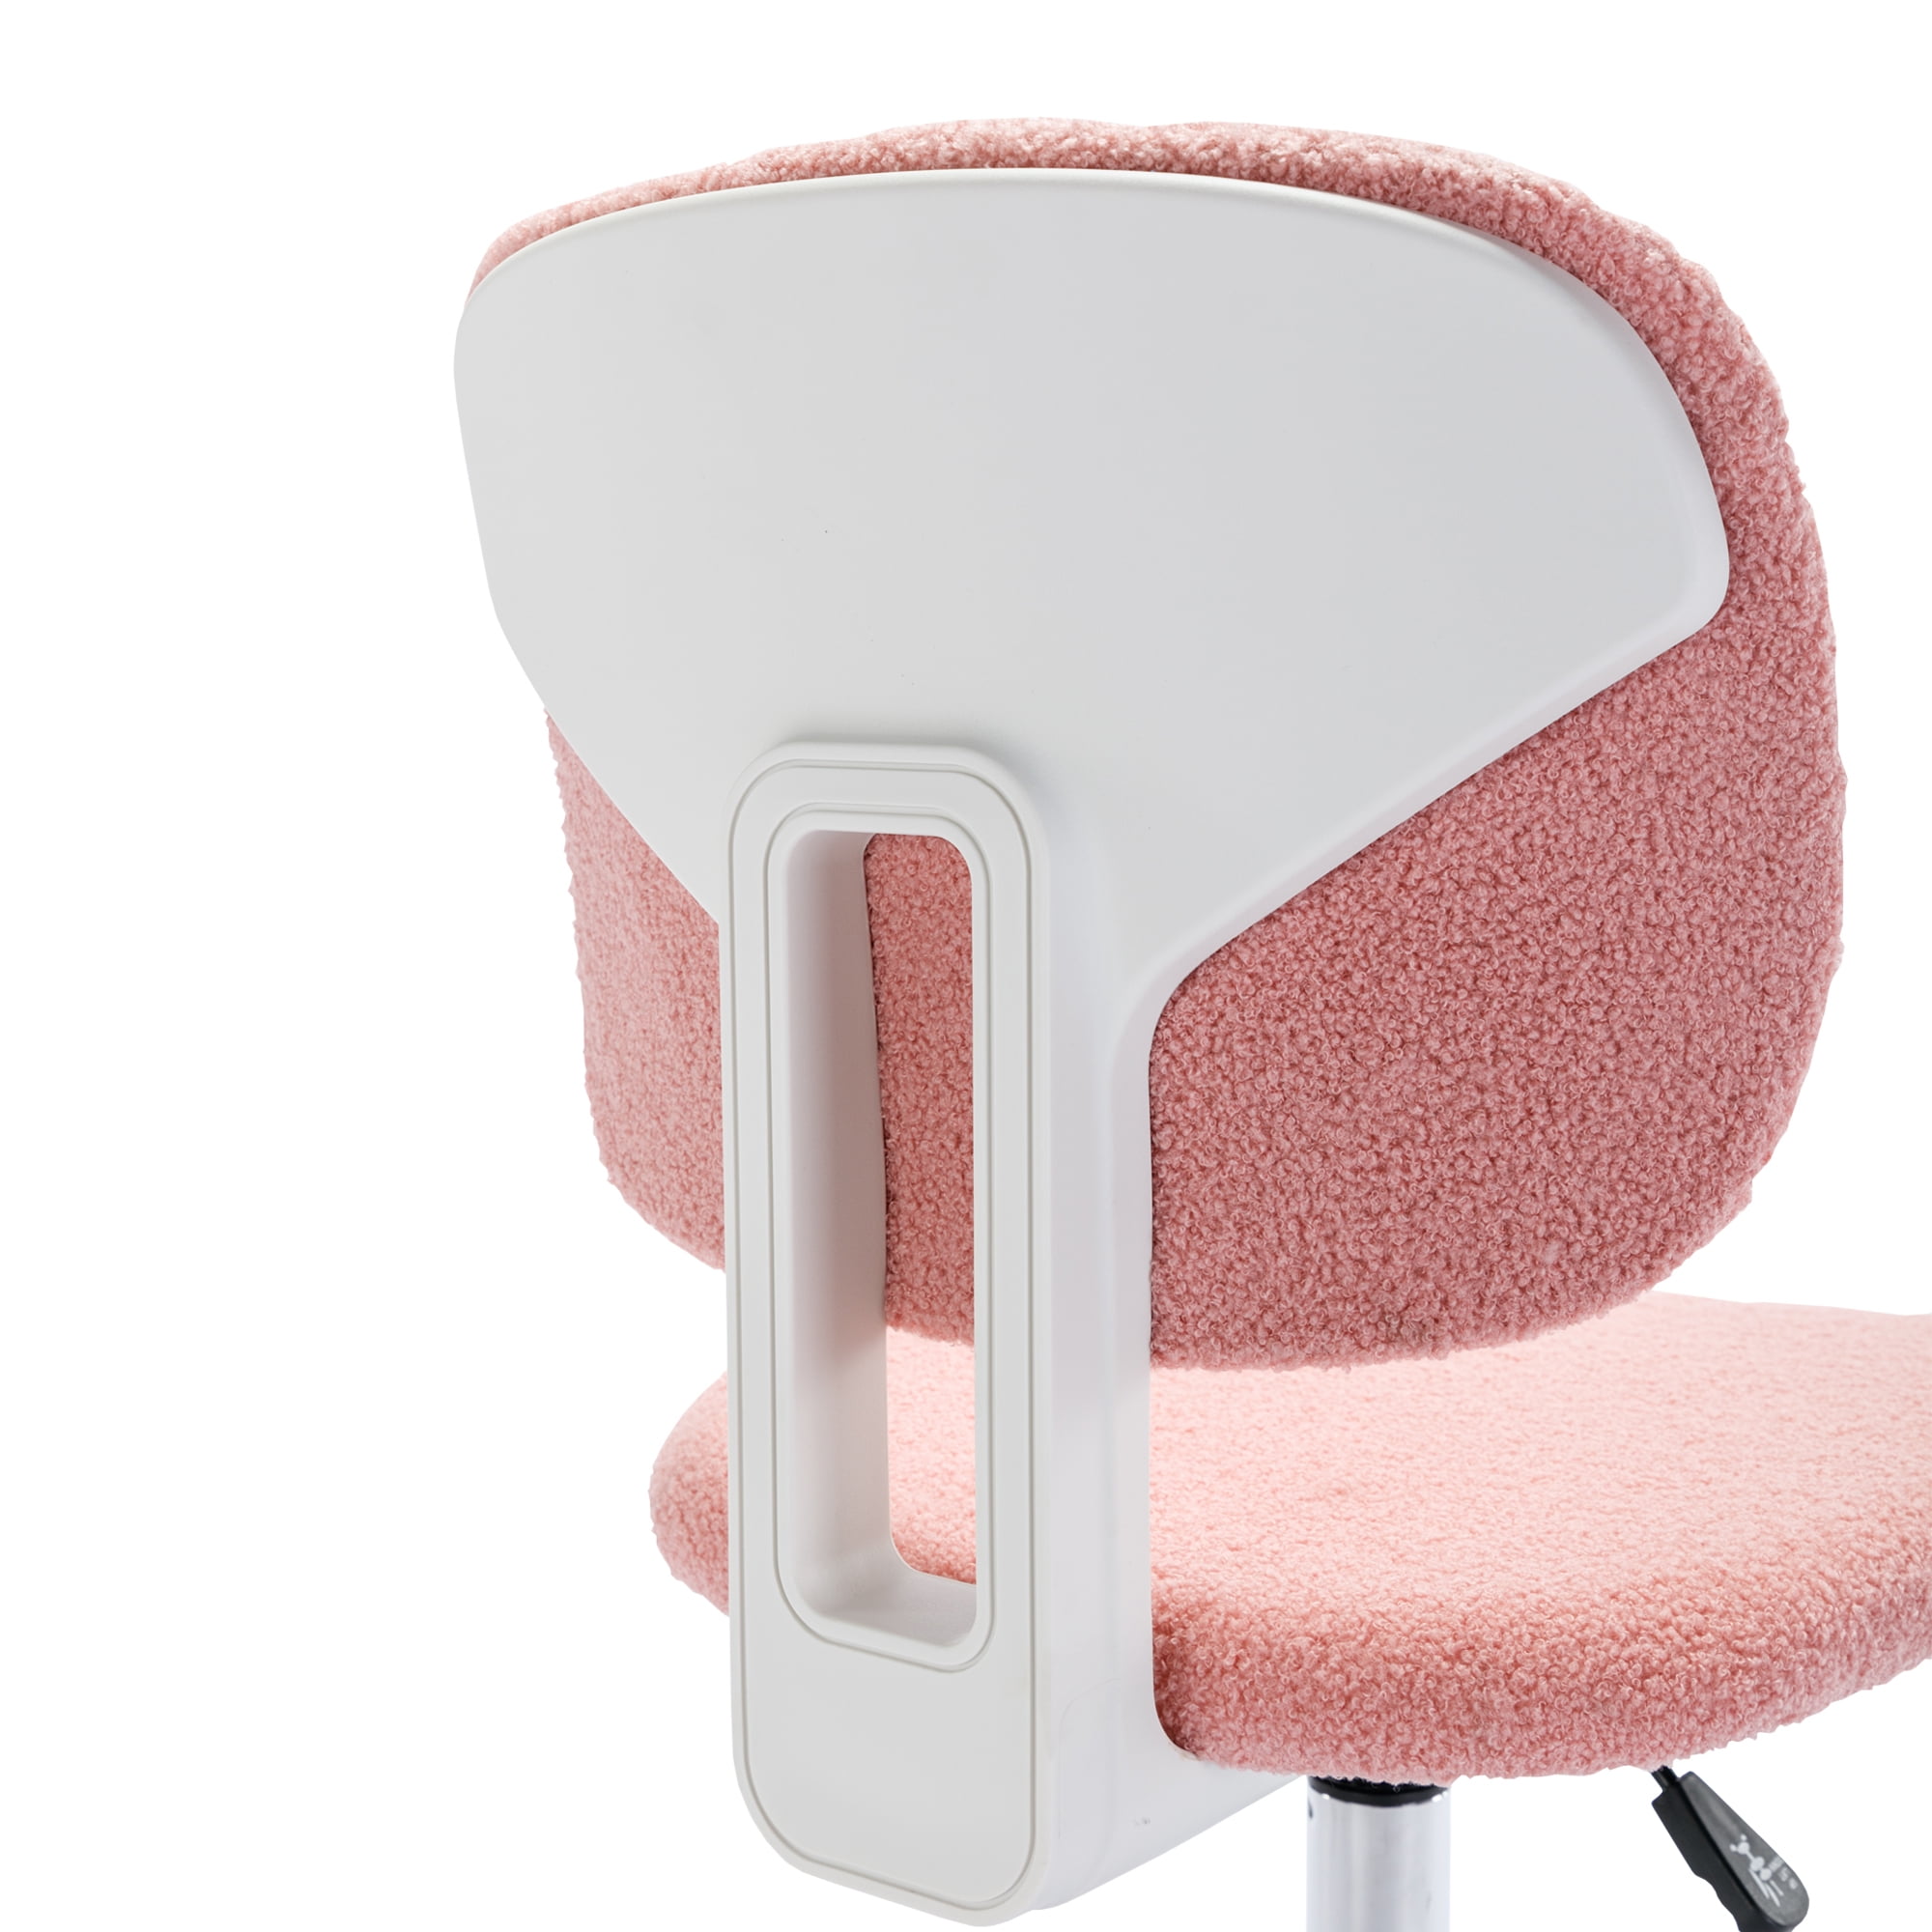 Dropship Pink Velvet Material. Home Computer Chair Office Chair Adjustable  360 °Swivel Cushion Chair With Black Foot Swivel Chair Makeup Chair Study  Desk Chair. No WheelsW115167384 to Sell Online at a Lower